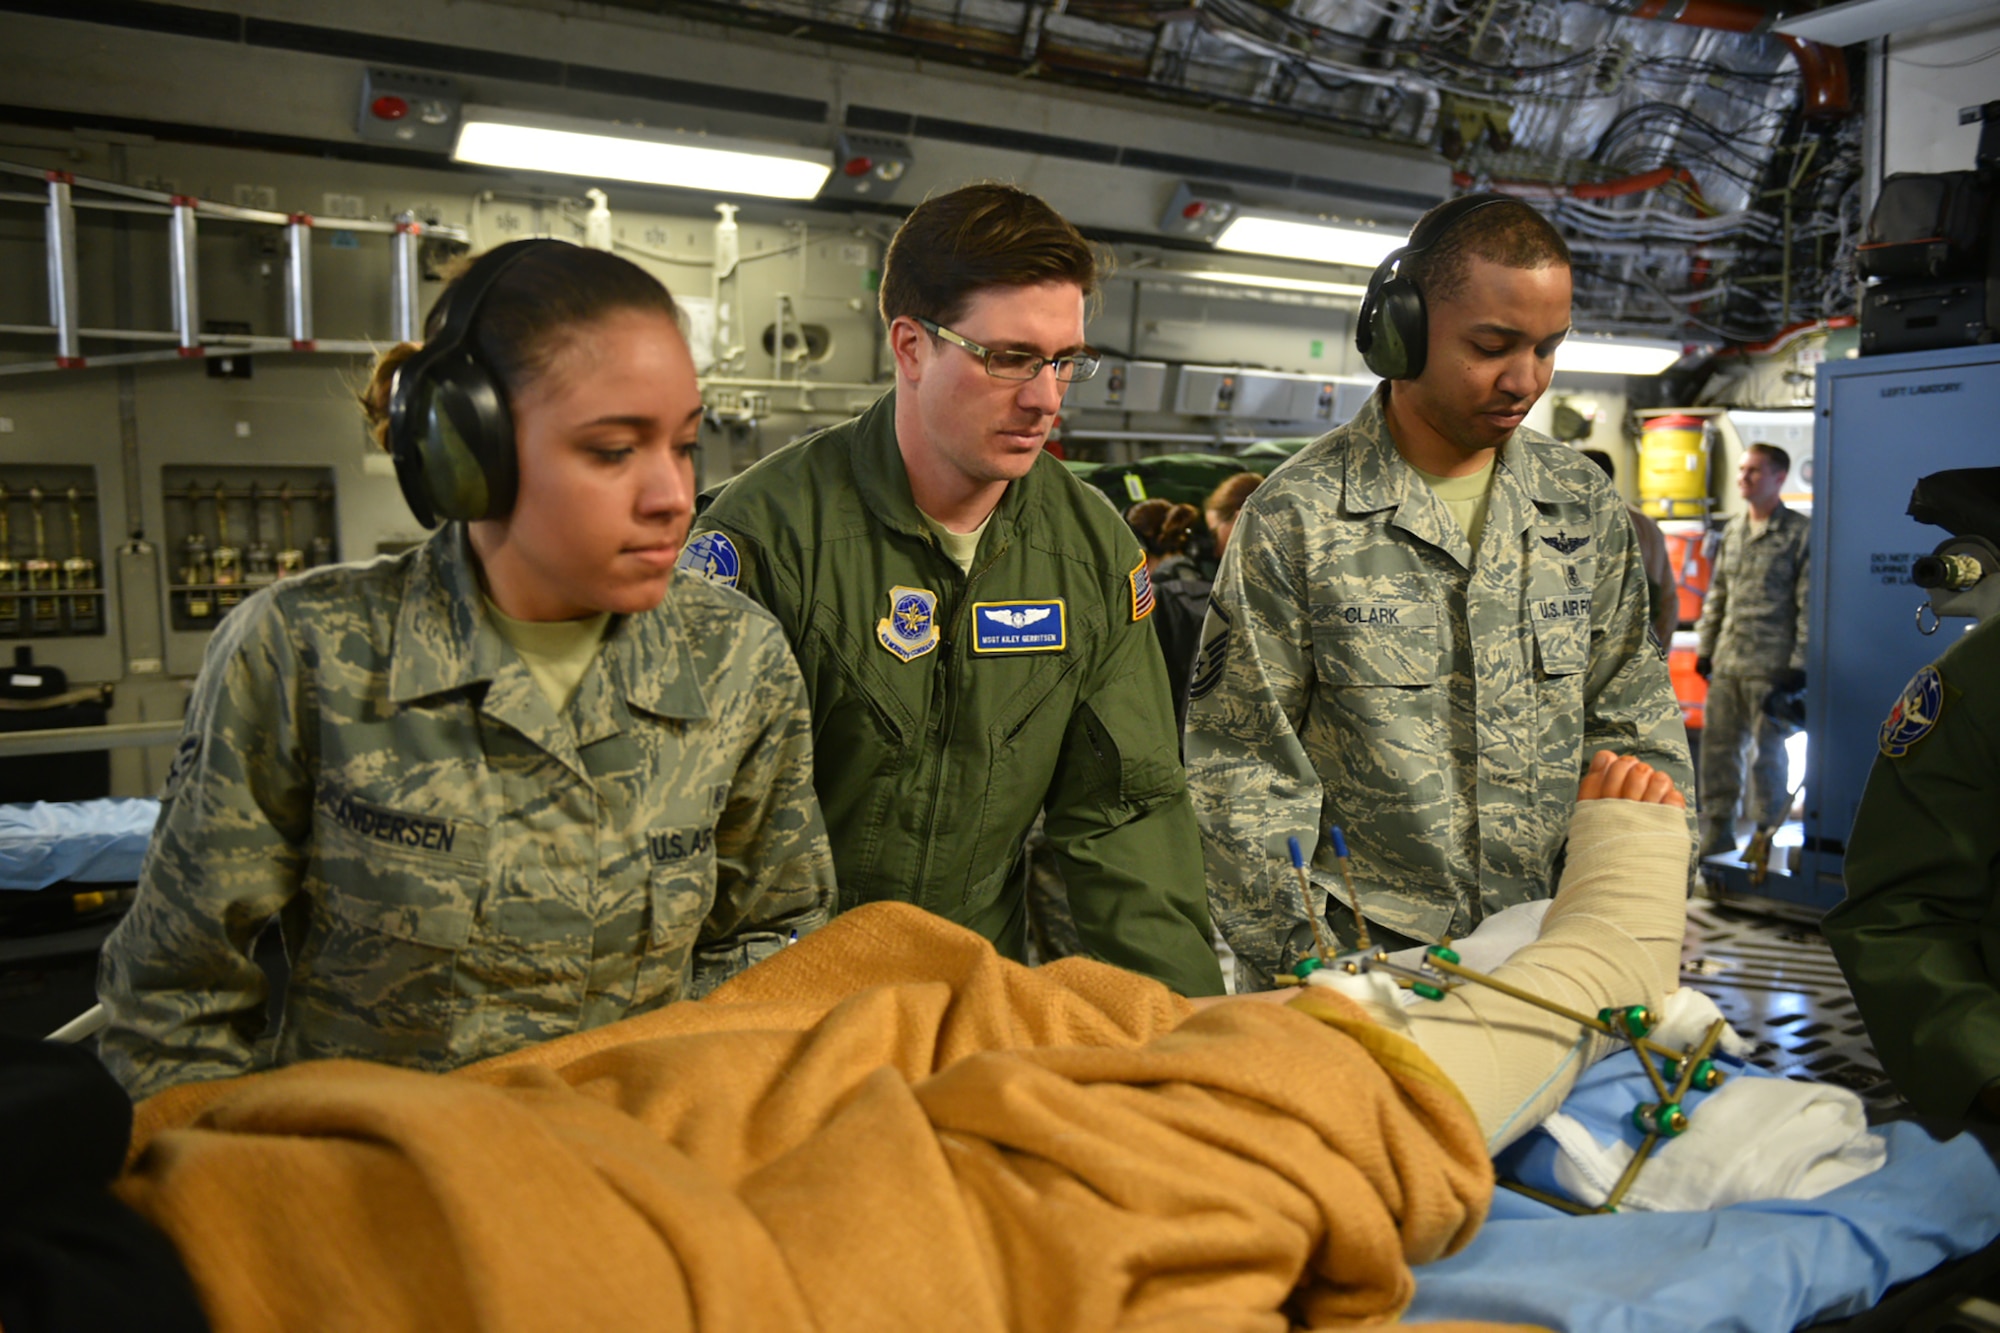 Master Sgt. Kiley Gerritsen, an aeromedical technician with the 445th Aeromedical Evacuation Squadron, Wright-Patterson Air Force Base, Ohio, helps provide care for wounded warriors while deployed here April 21, 2016. Kiley and his wife, Jennifer, also assigned to the 445th AES, had the opportunity to serve together on this flight as they usually serve on separate crews tasked to rotate moving medical patients from down range to Germany and/or back to the United States. Even though they are on separate crews, their paths often cross as crews help others with preparing the aircraft and loading patients before going off on missions. (U.S. Air Force photo/Tech. Sgt. Frank Oliver)